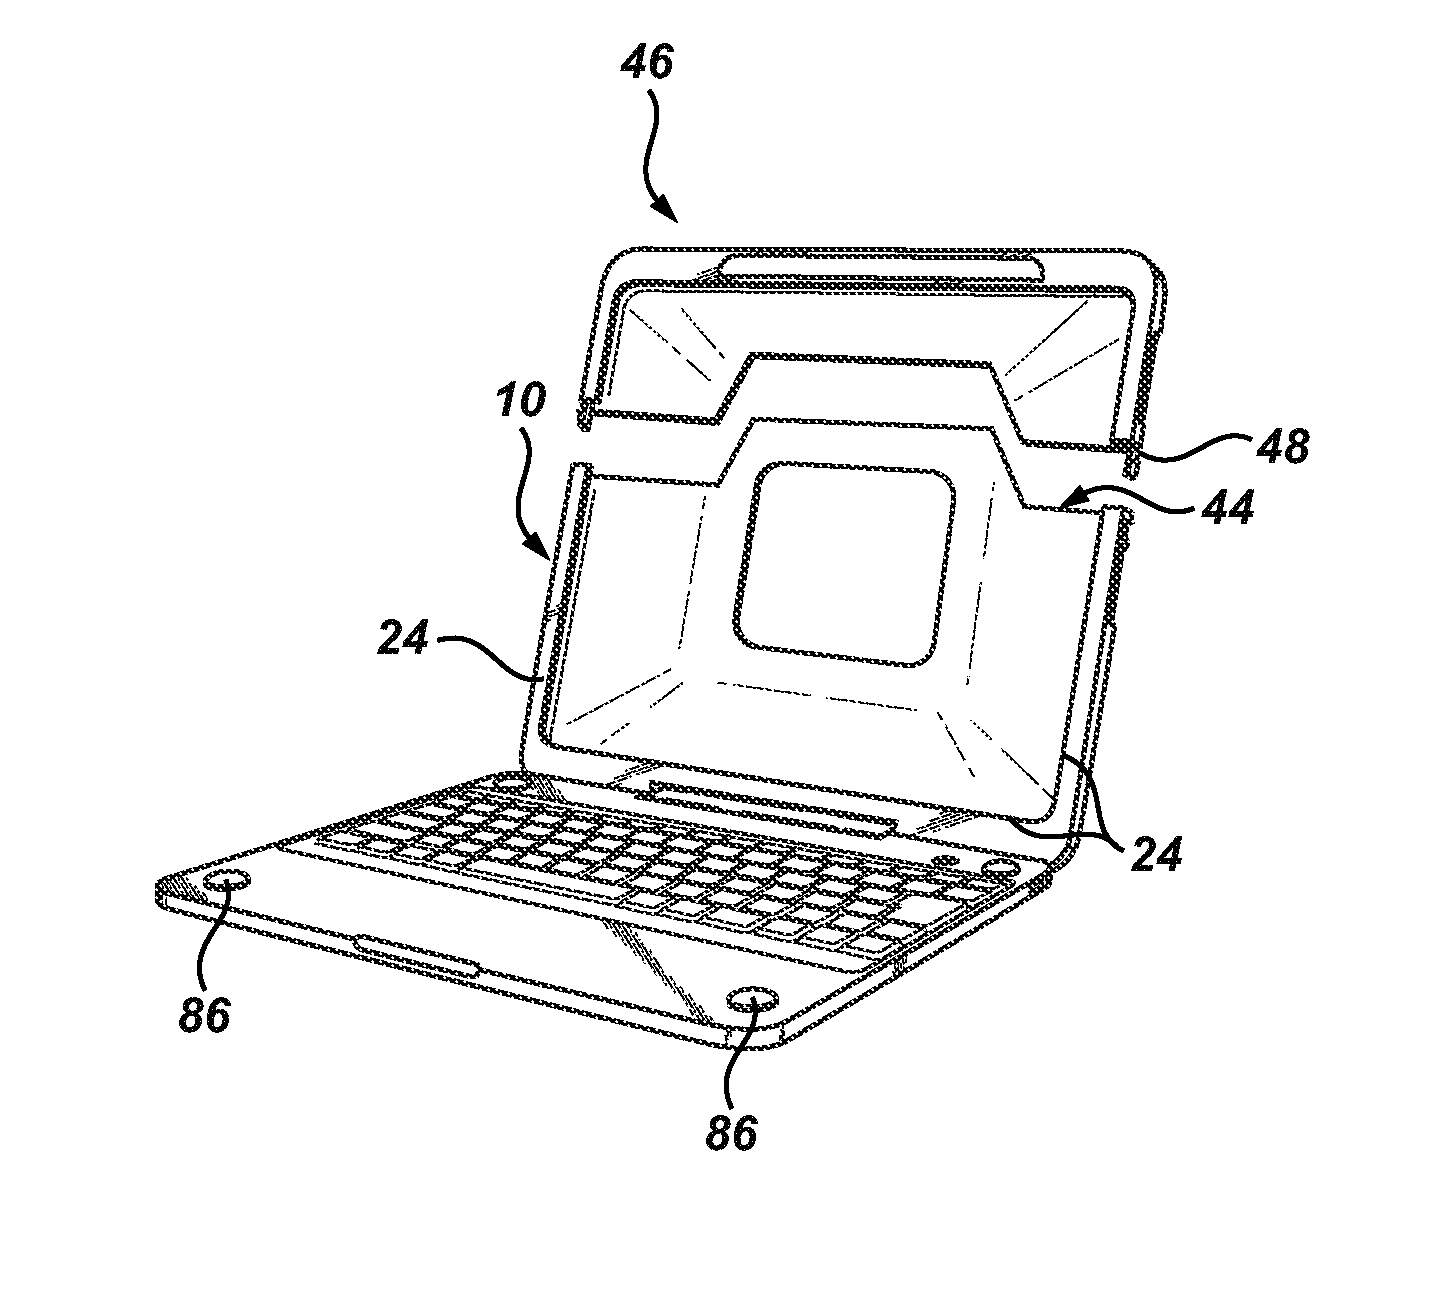 Tablet computer case and associated methods